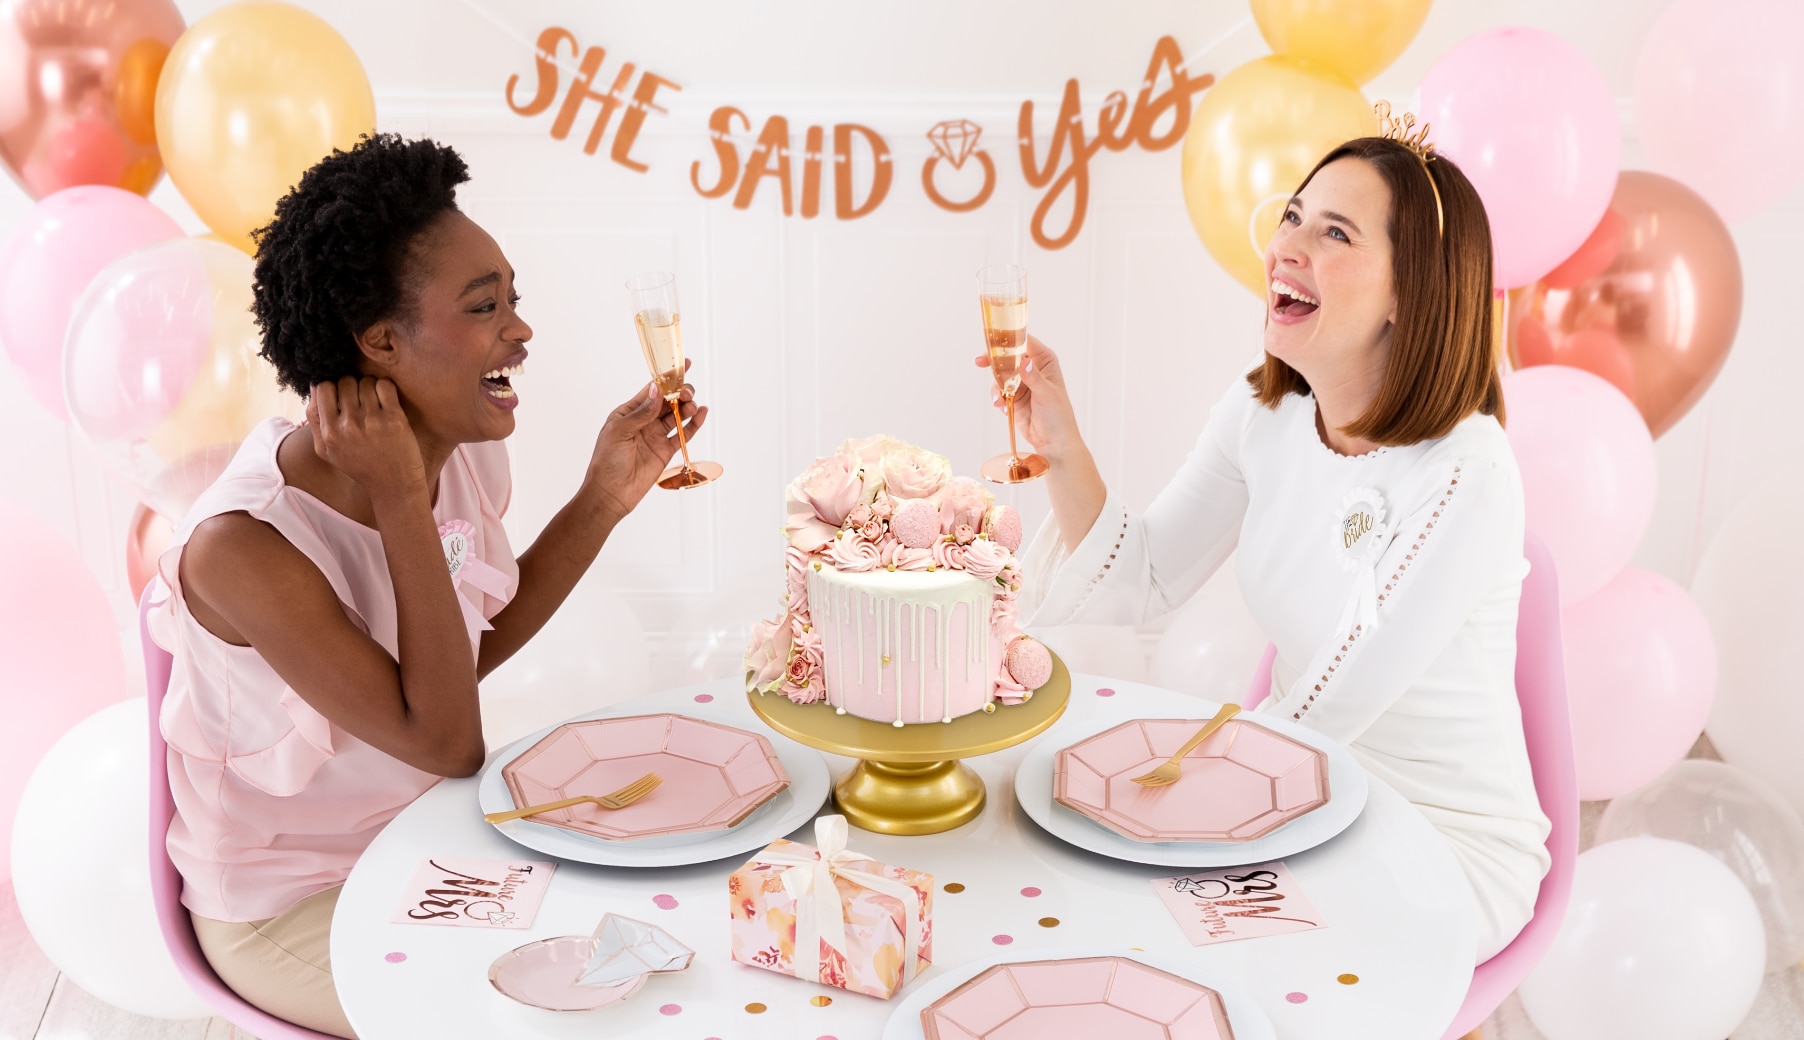 Two laughing women holding champagne glasses sitting at a table, in a room decorated with pink balloons, tableware and a banner that reads "SHE SAID YES".